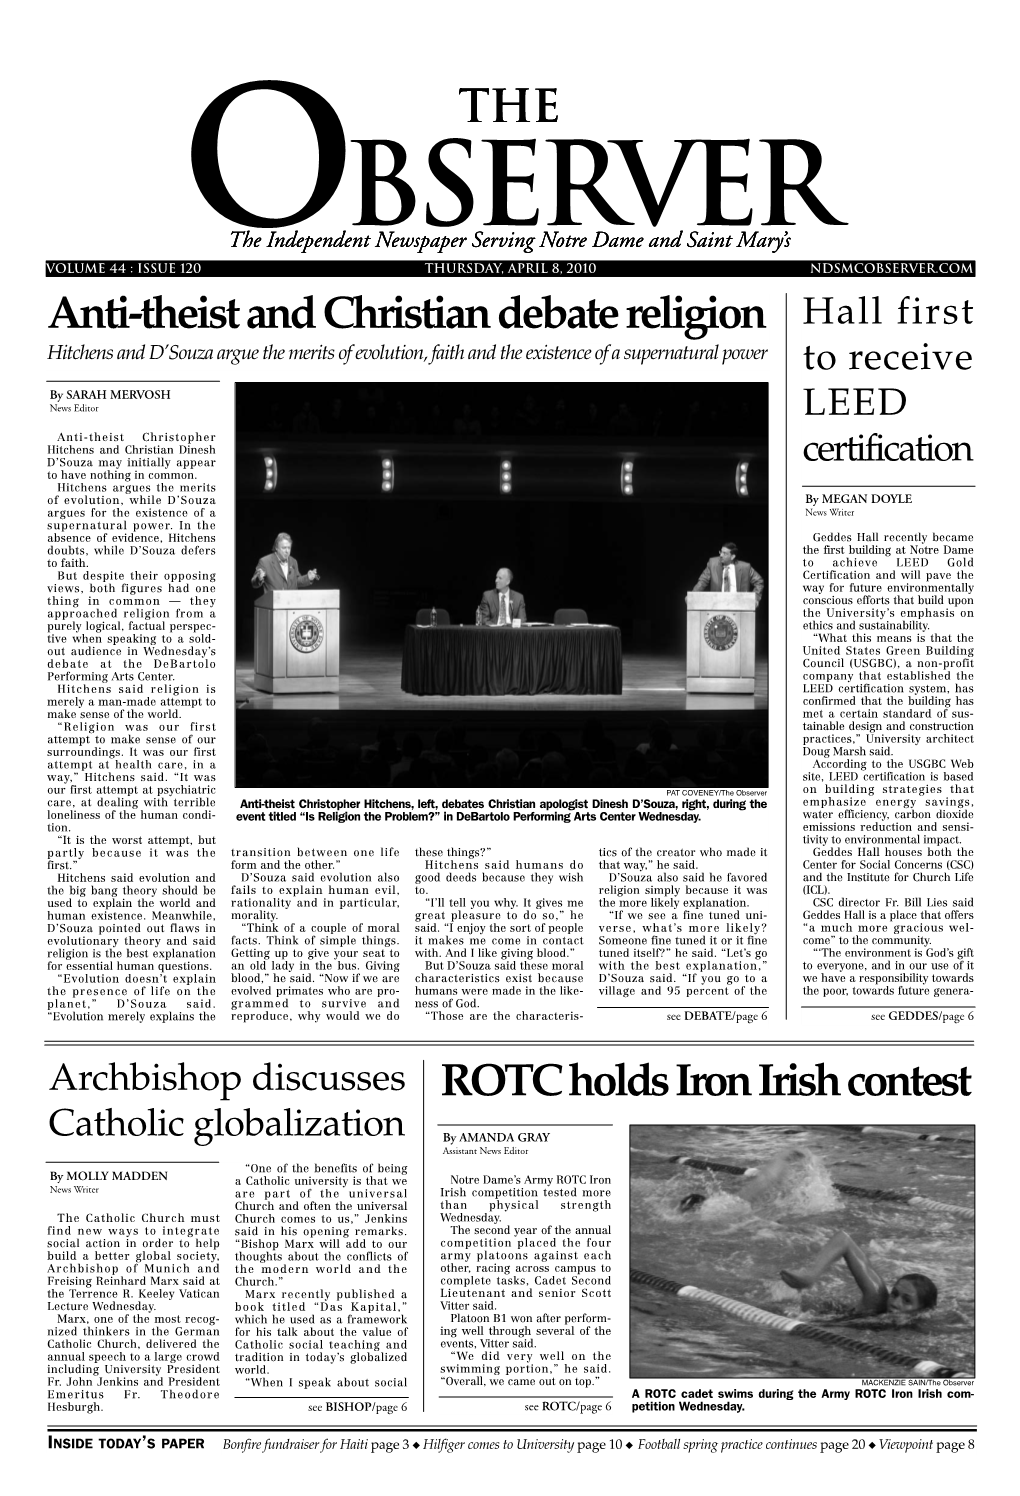 Anti-Theist and Christian Debate Religion Hall First ROTC Holds Iron